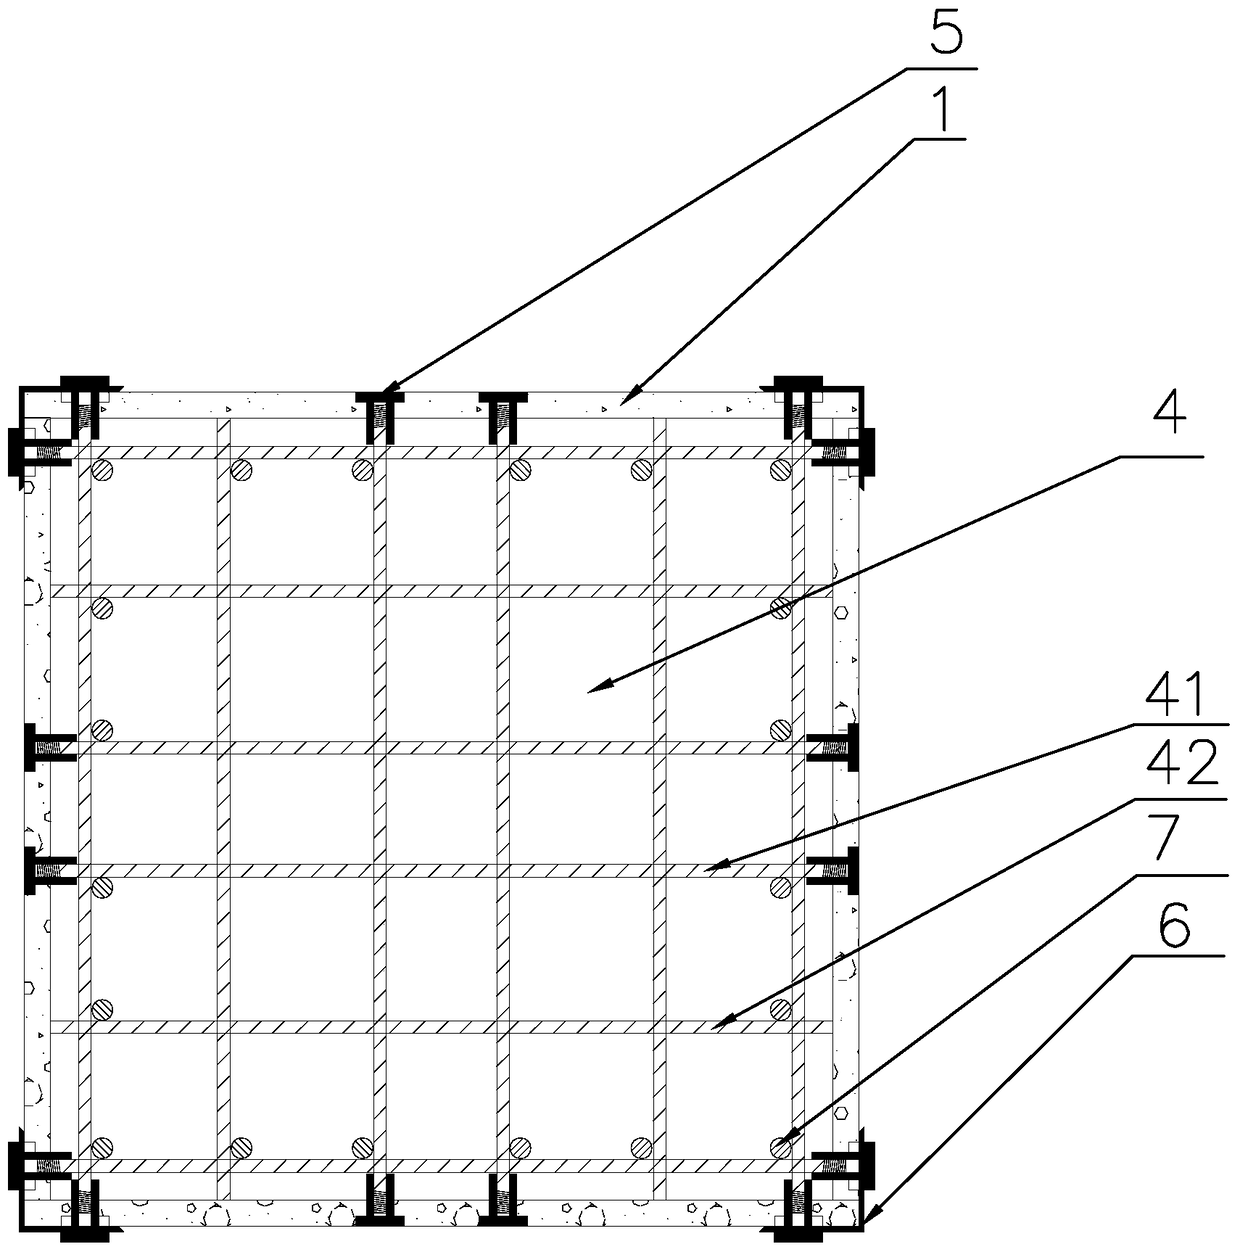 A self-balancing integral formwork assembly structure of reinforced concrete columns